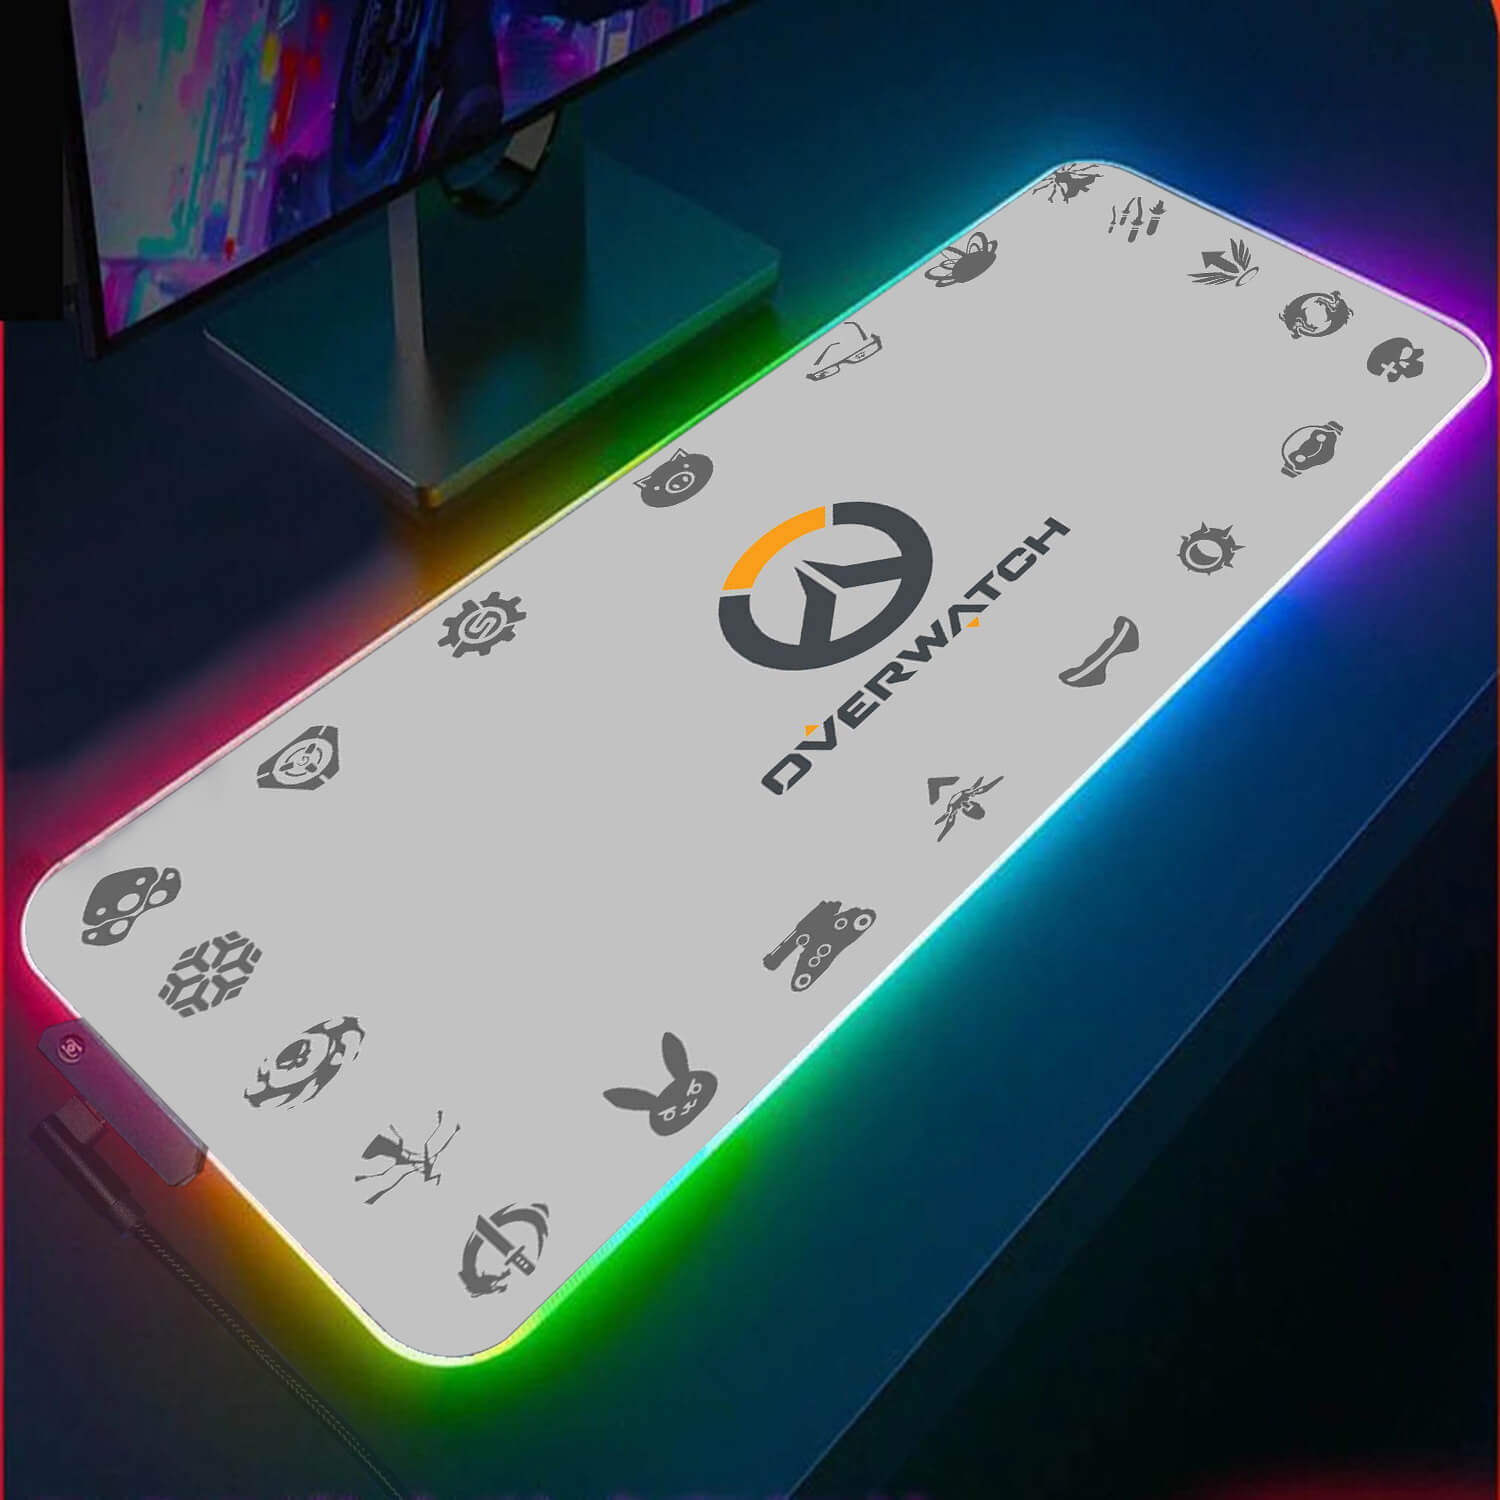 Overwatch RGB Gaming Mouse Pad(7 Designs)